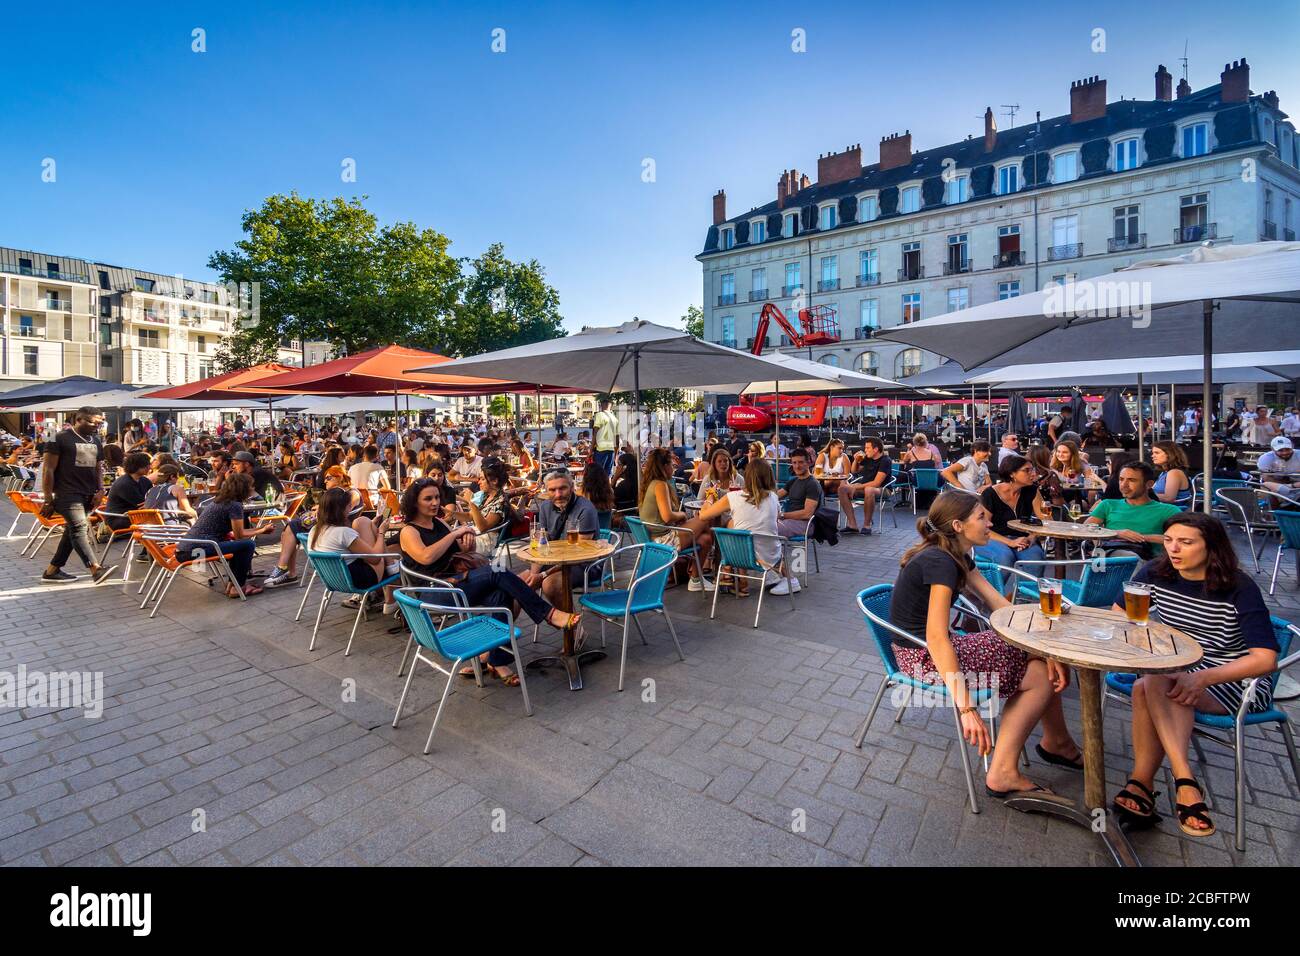 Summer evening drinkers crowded into the Place du Bouffay, Nantes, Loire-Atlantique, France. Stock Photo